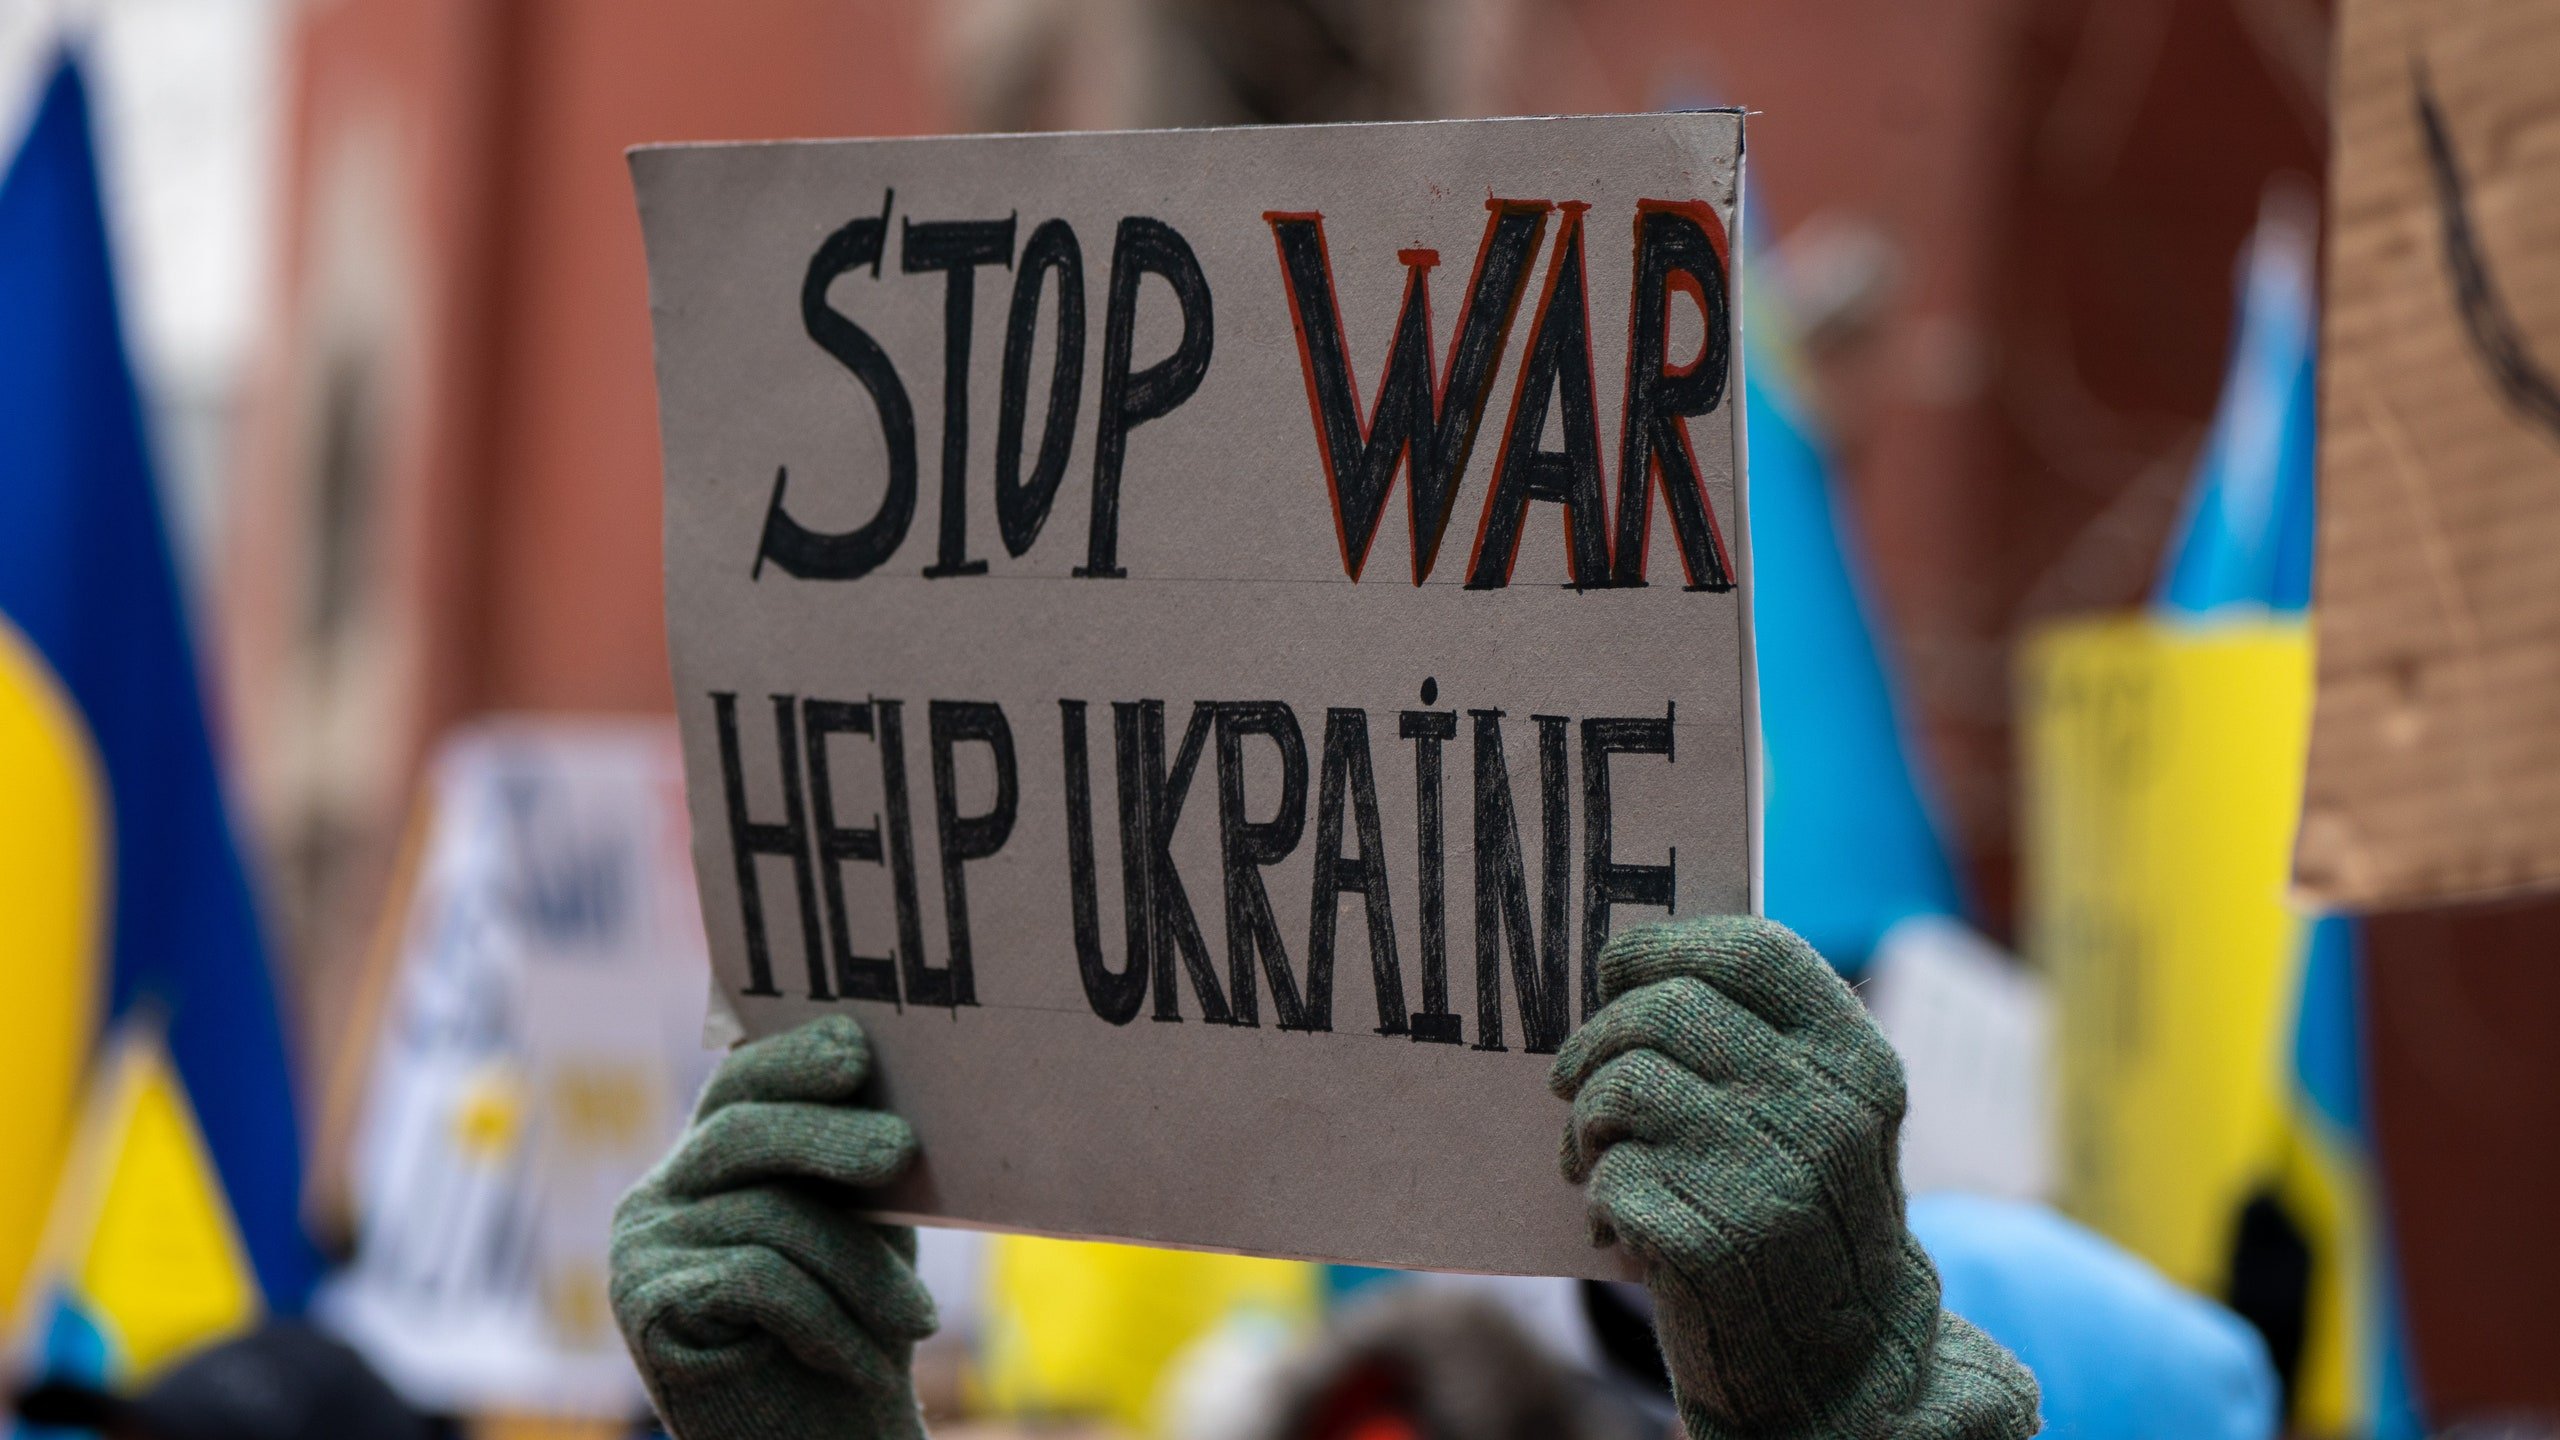 Here's Where You Can Donate to Help Ukraine